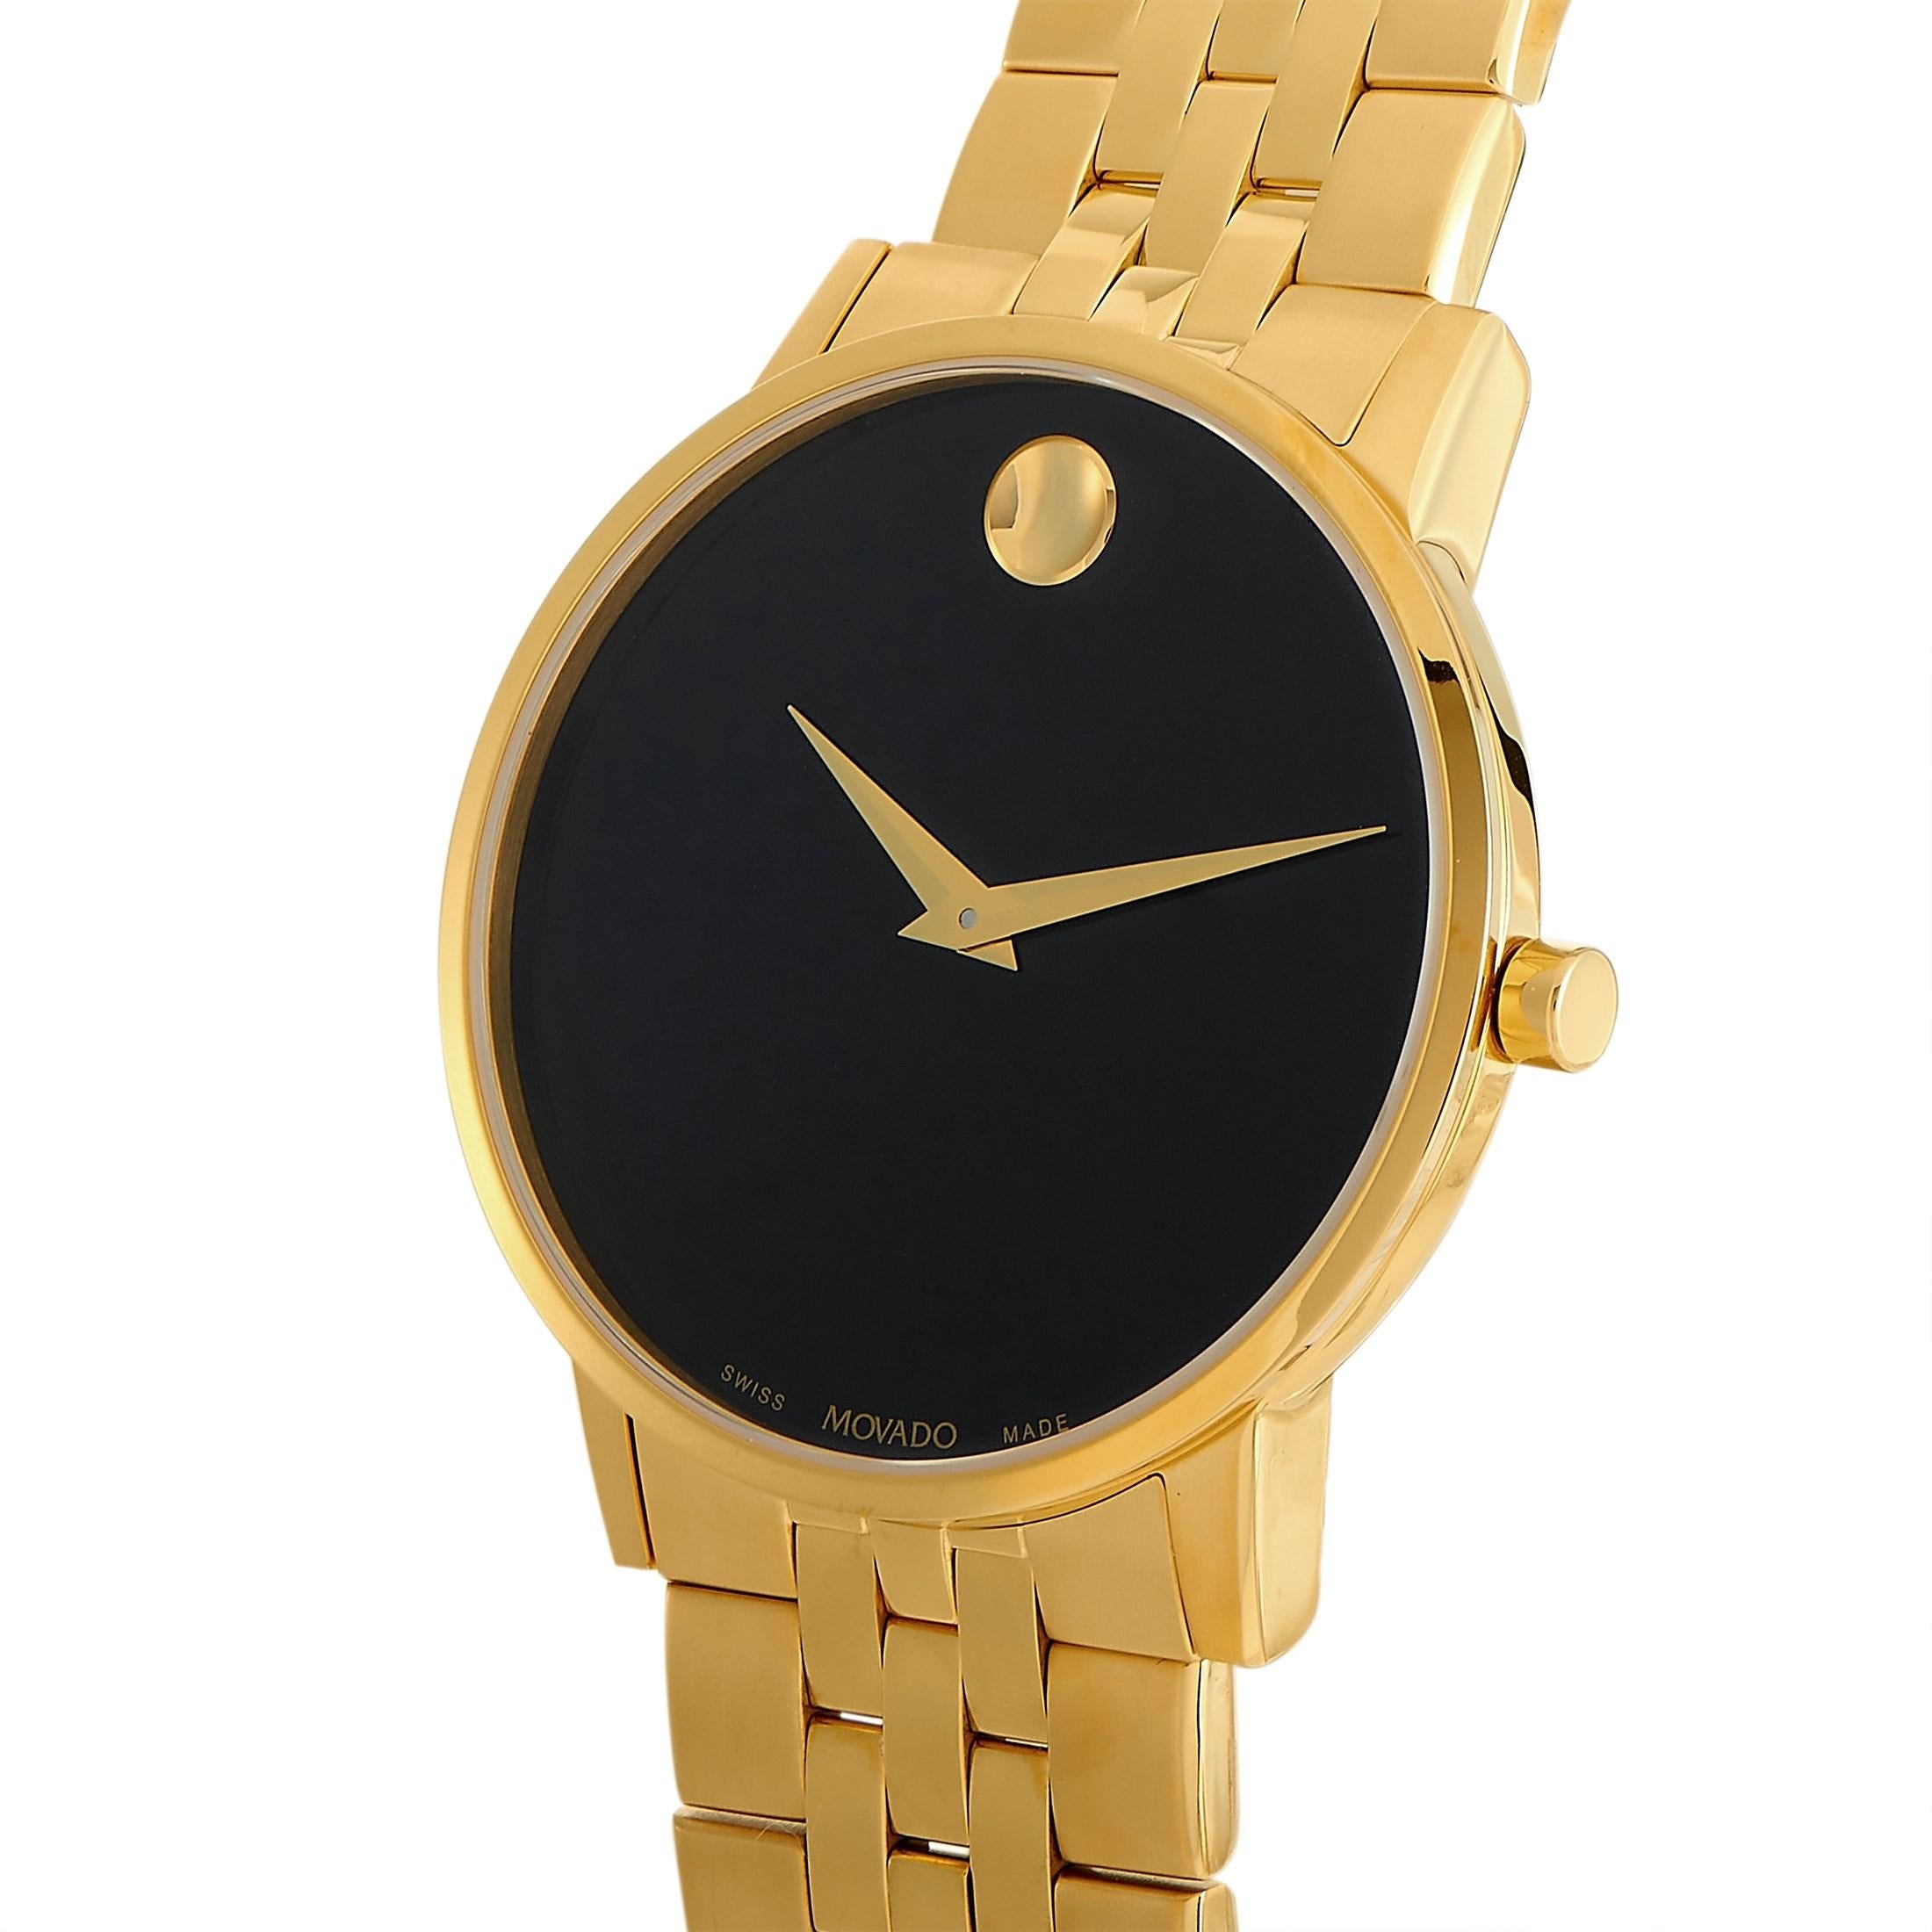 The Movado Museum Classic watch, reference number MV0607203, comes with a yellow PVD-plated stainless steel case that measures 40 mm in diameter. The case is presented on a matching yellow PVD-plated stainless steel bracelet, secured on the wrist